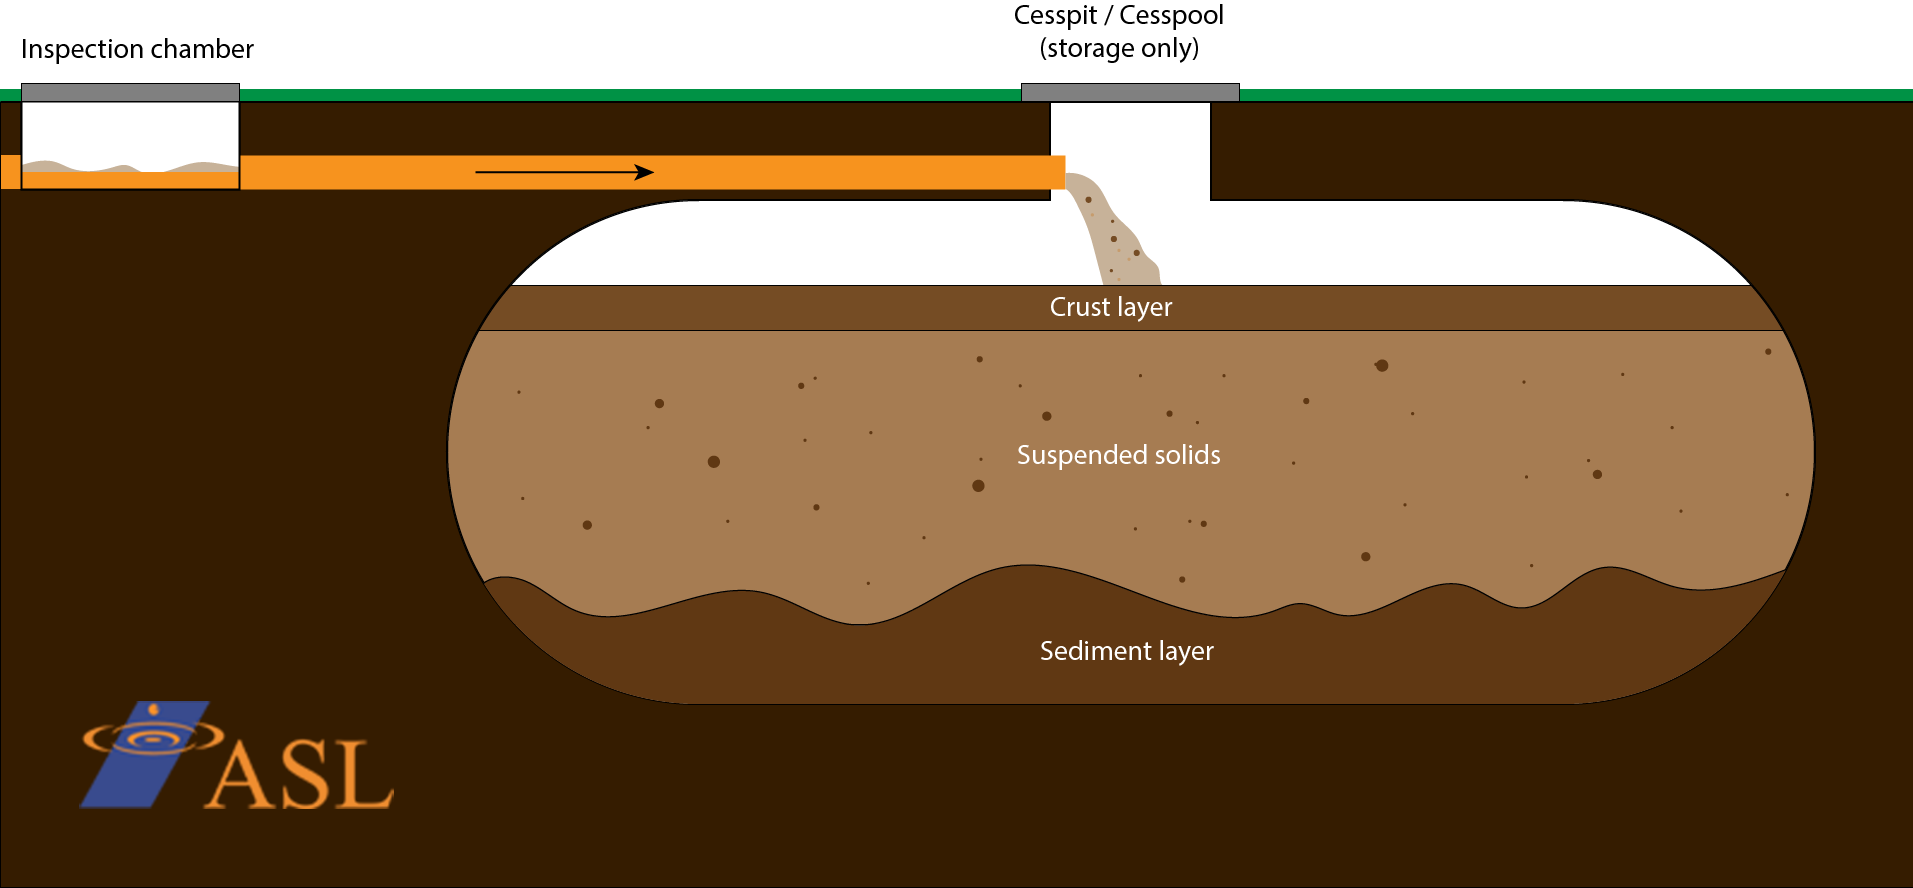 This is a cross section diagram of a cesspool / cesspit created by ASL Limited